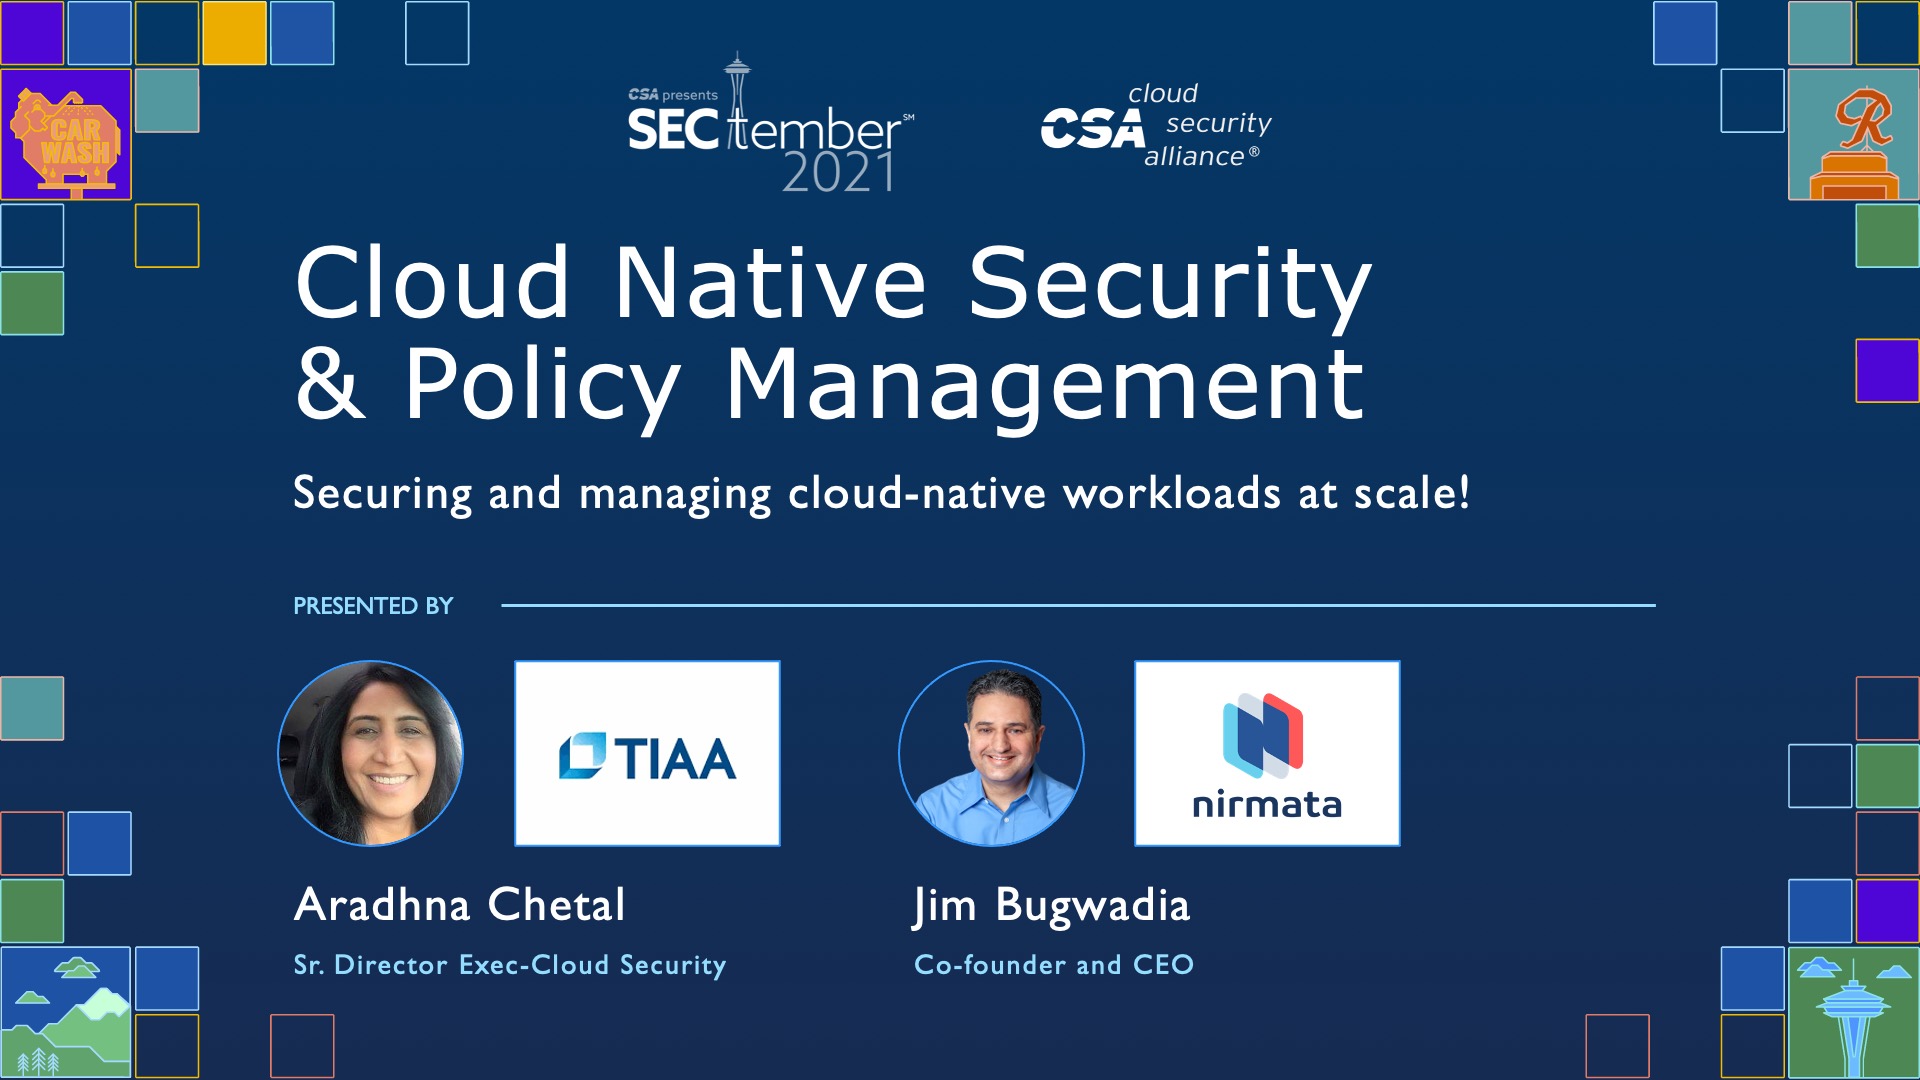 Cloud Native Security & Policy Management